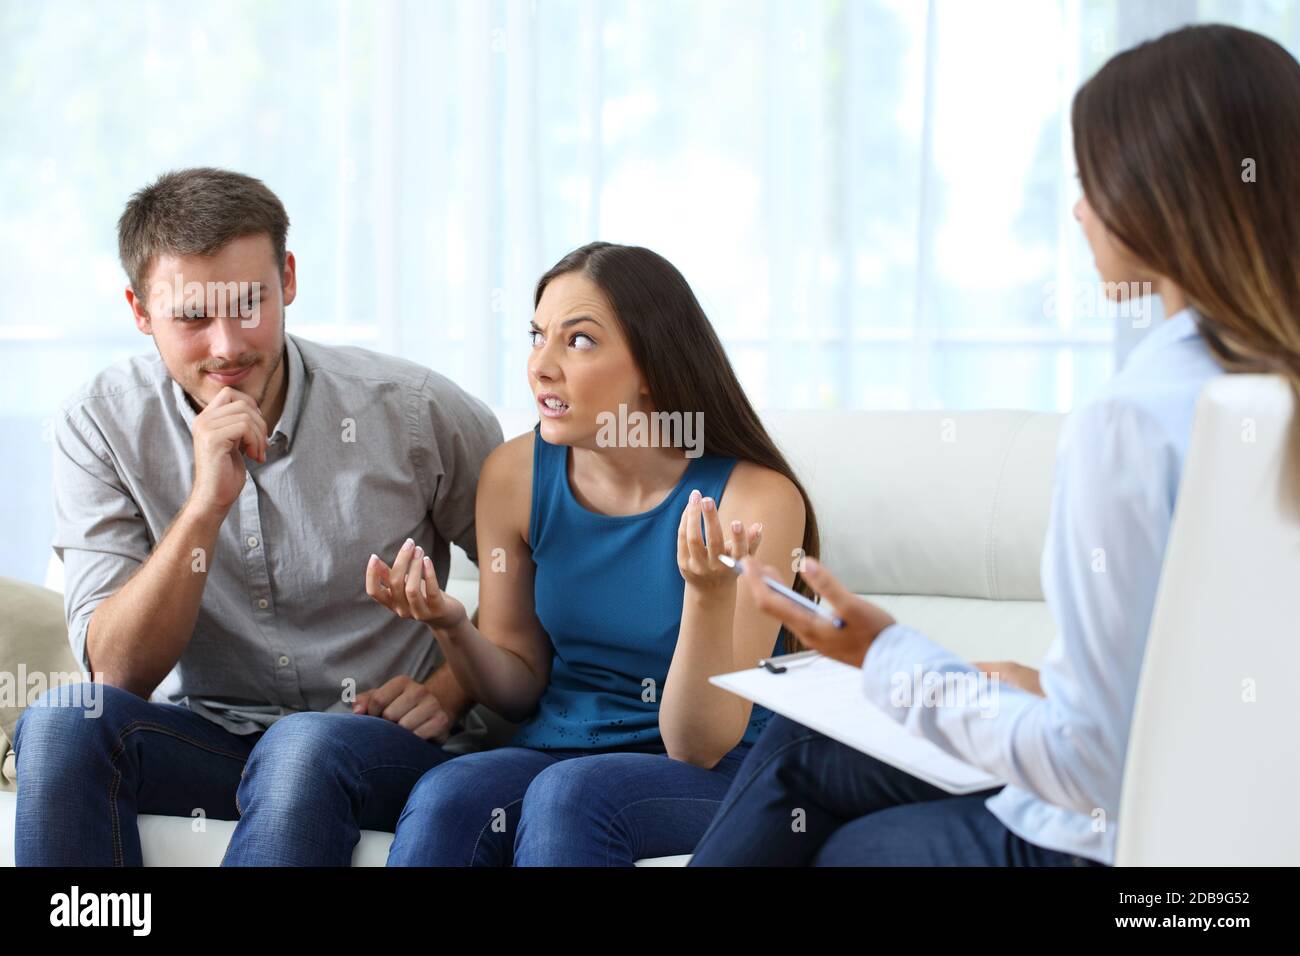 Husband flirting with therapist in couple therapy and getting caught by upset wife Stock Photo